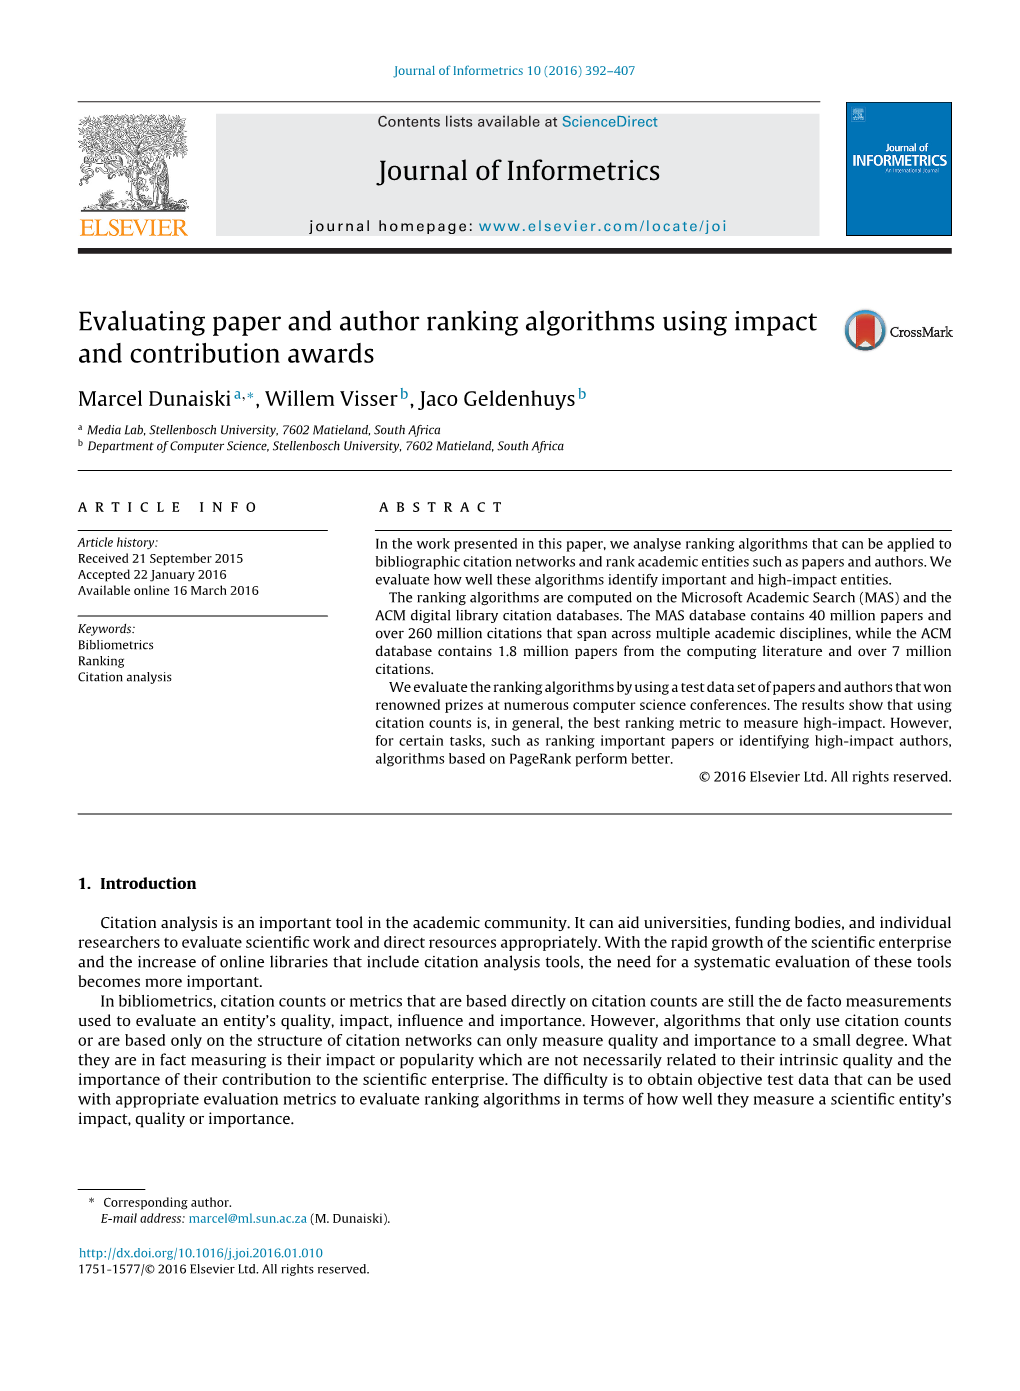 Evaluating Paper and Author Ranking Algorithms Using Impact and Contribution Awards